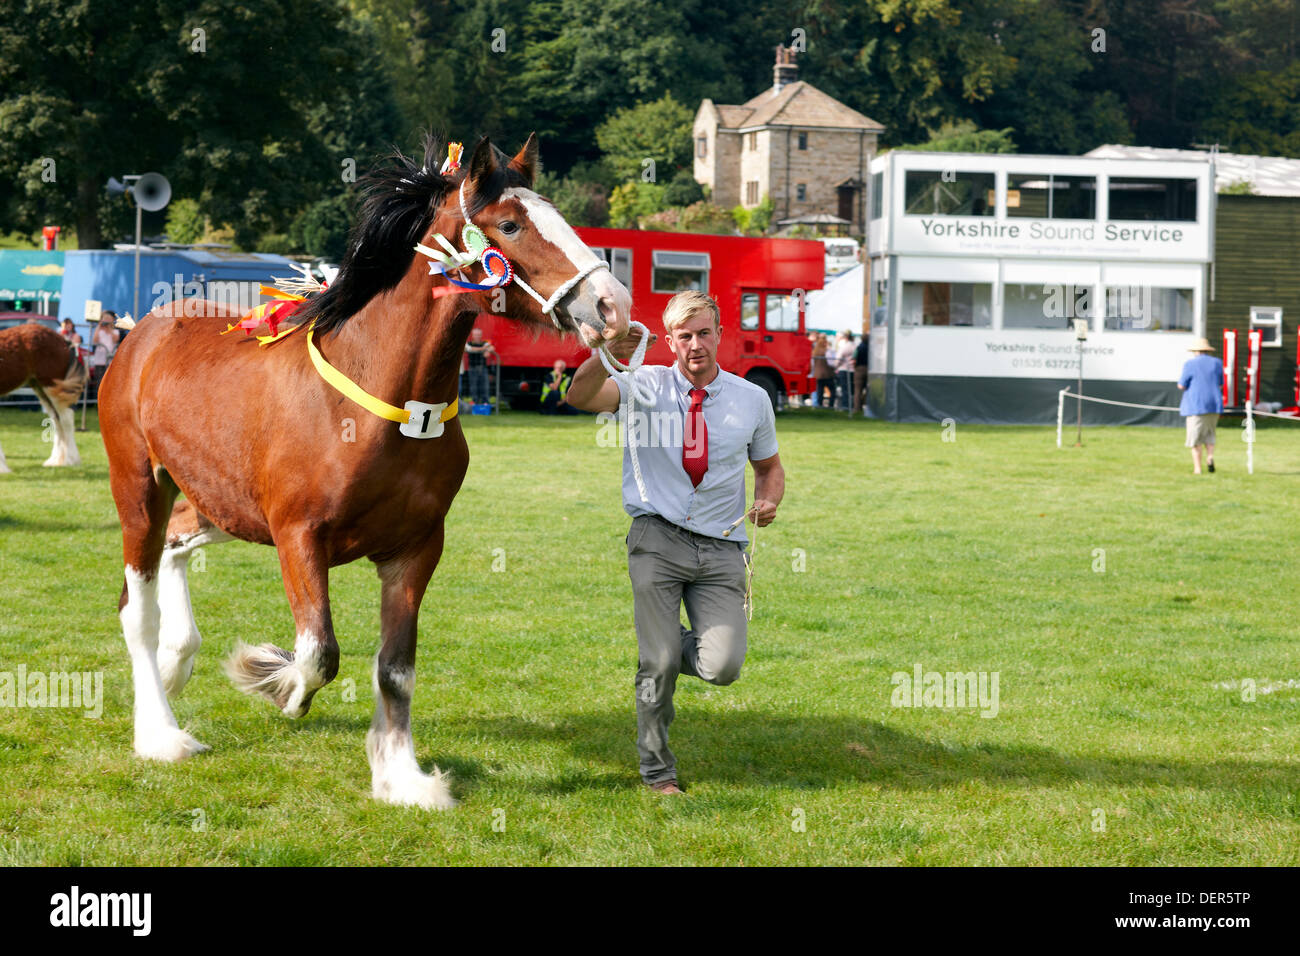 Nidderdale Show, Pateley Bridge, North Yorkshire, UK. 23rd Sep, 2013. A successful competitor in the Heavy Agricultural Horse category does a lap of honour in the warm autumn sunshine as the good weather brings in the crowds to the Nidderdale Show. The Annual Nidderdale Show, held in the picturesque surrounds of Bewerley Park, Pateley Bridge, is one of the county’s foremost agricultural shows. It regularly attracts crowds of 20,000 and traditionally marks the end of the agricultural show season. Credit:  Christina Bollen/Alamy Live News Stock Photo